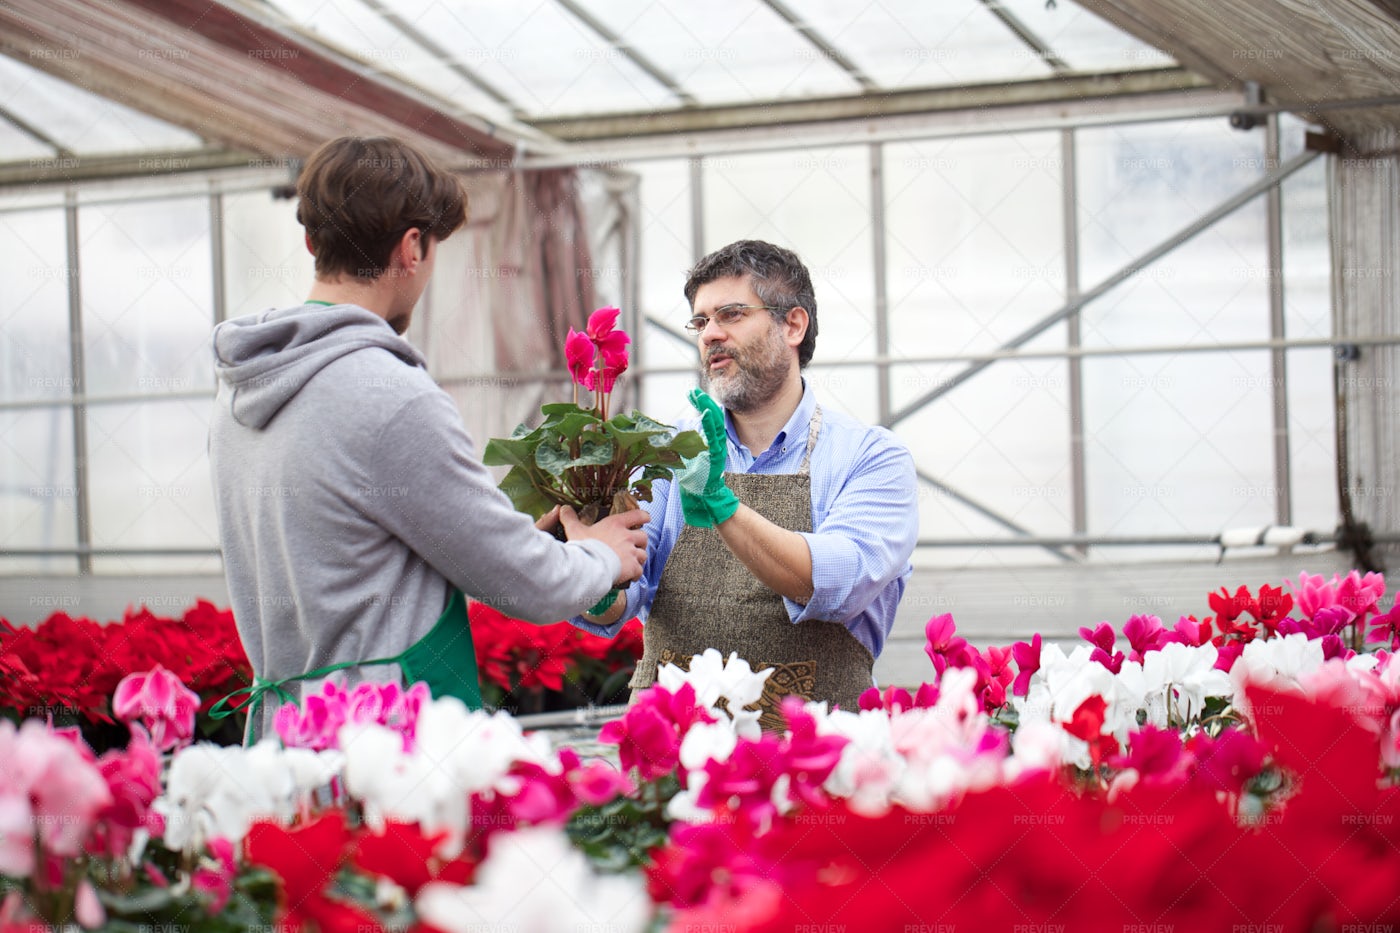 Handing Over Potted Flowers: Stock Photos